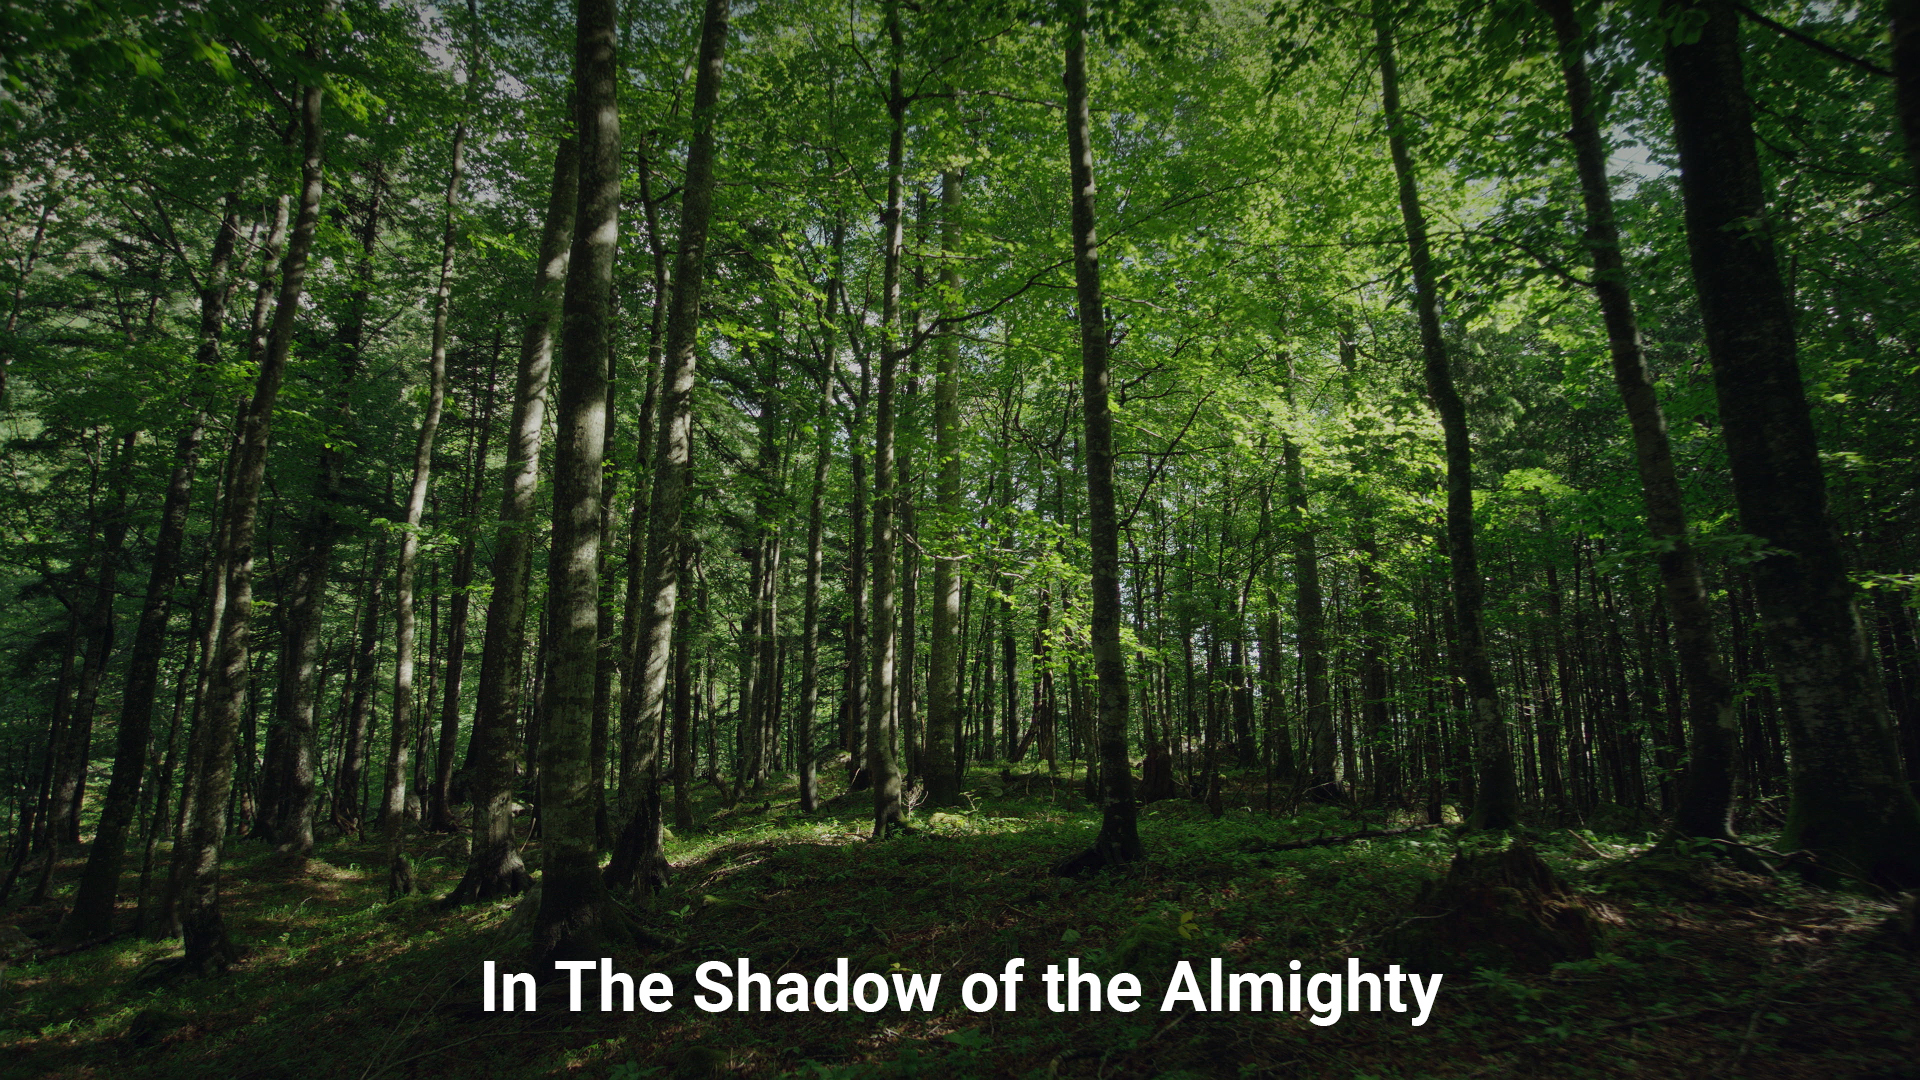 In The Shadow of the Almighty